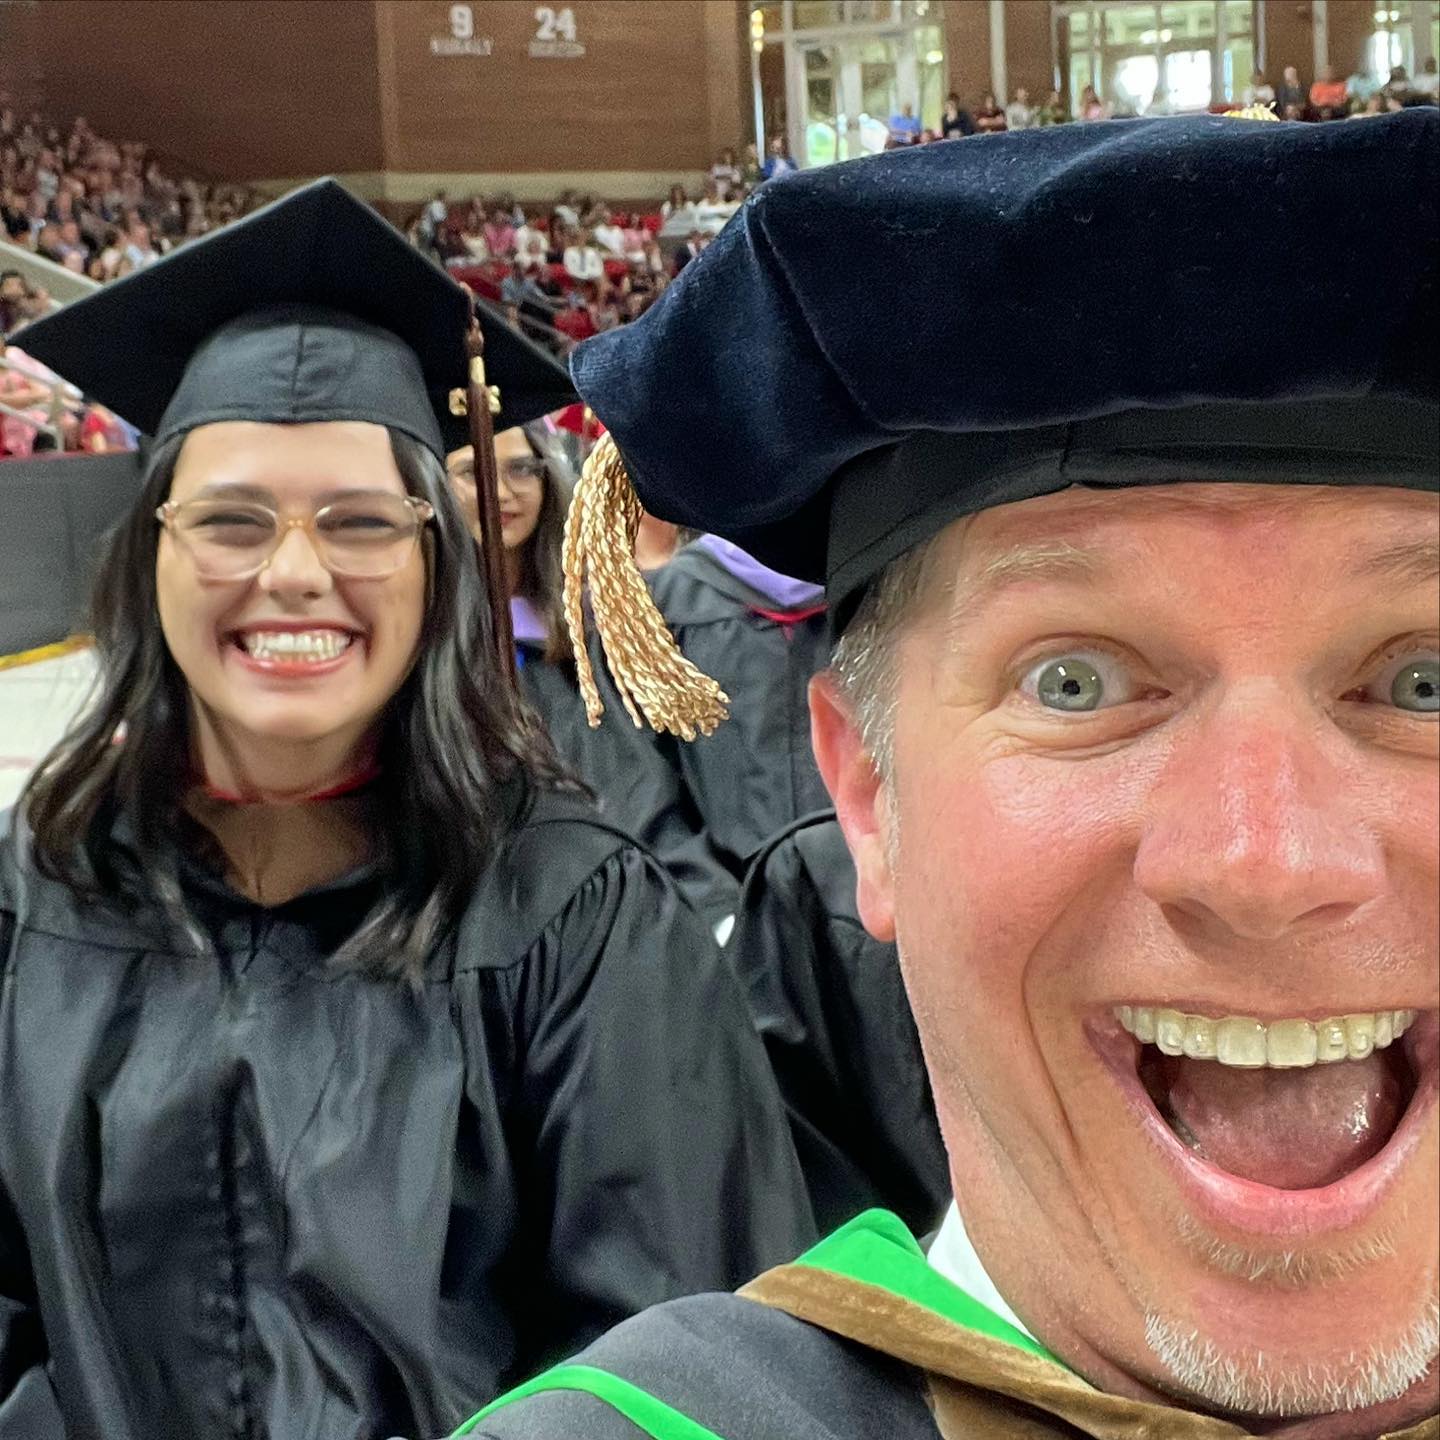 Professor perk: floor seats with the most important people in the room: our graduates! Congrats to all @miamiuniversity @miamiohcca Grads! @xdmiamioh @designmiamioh